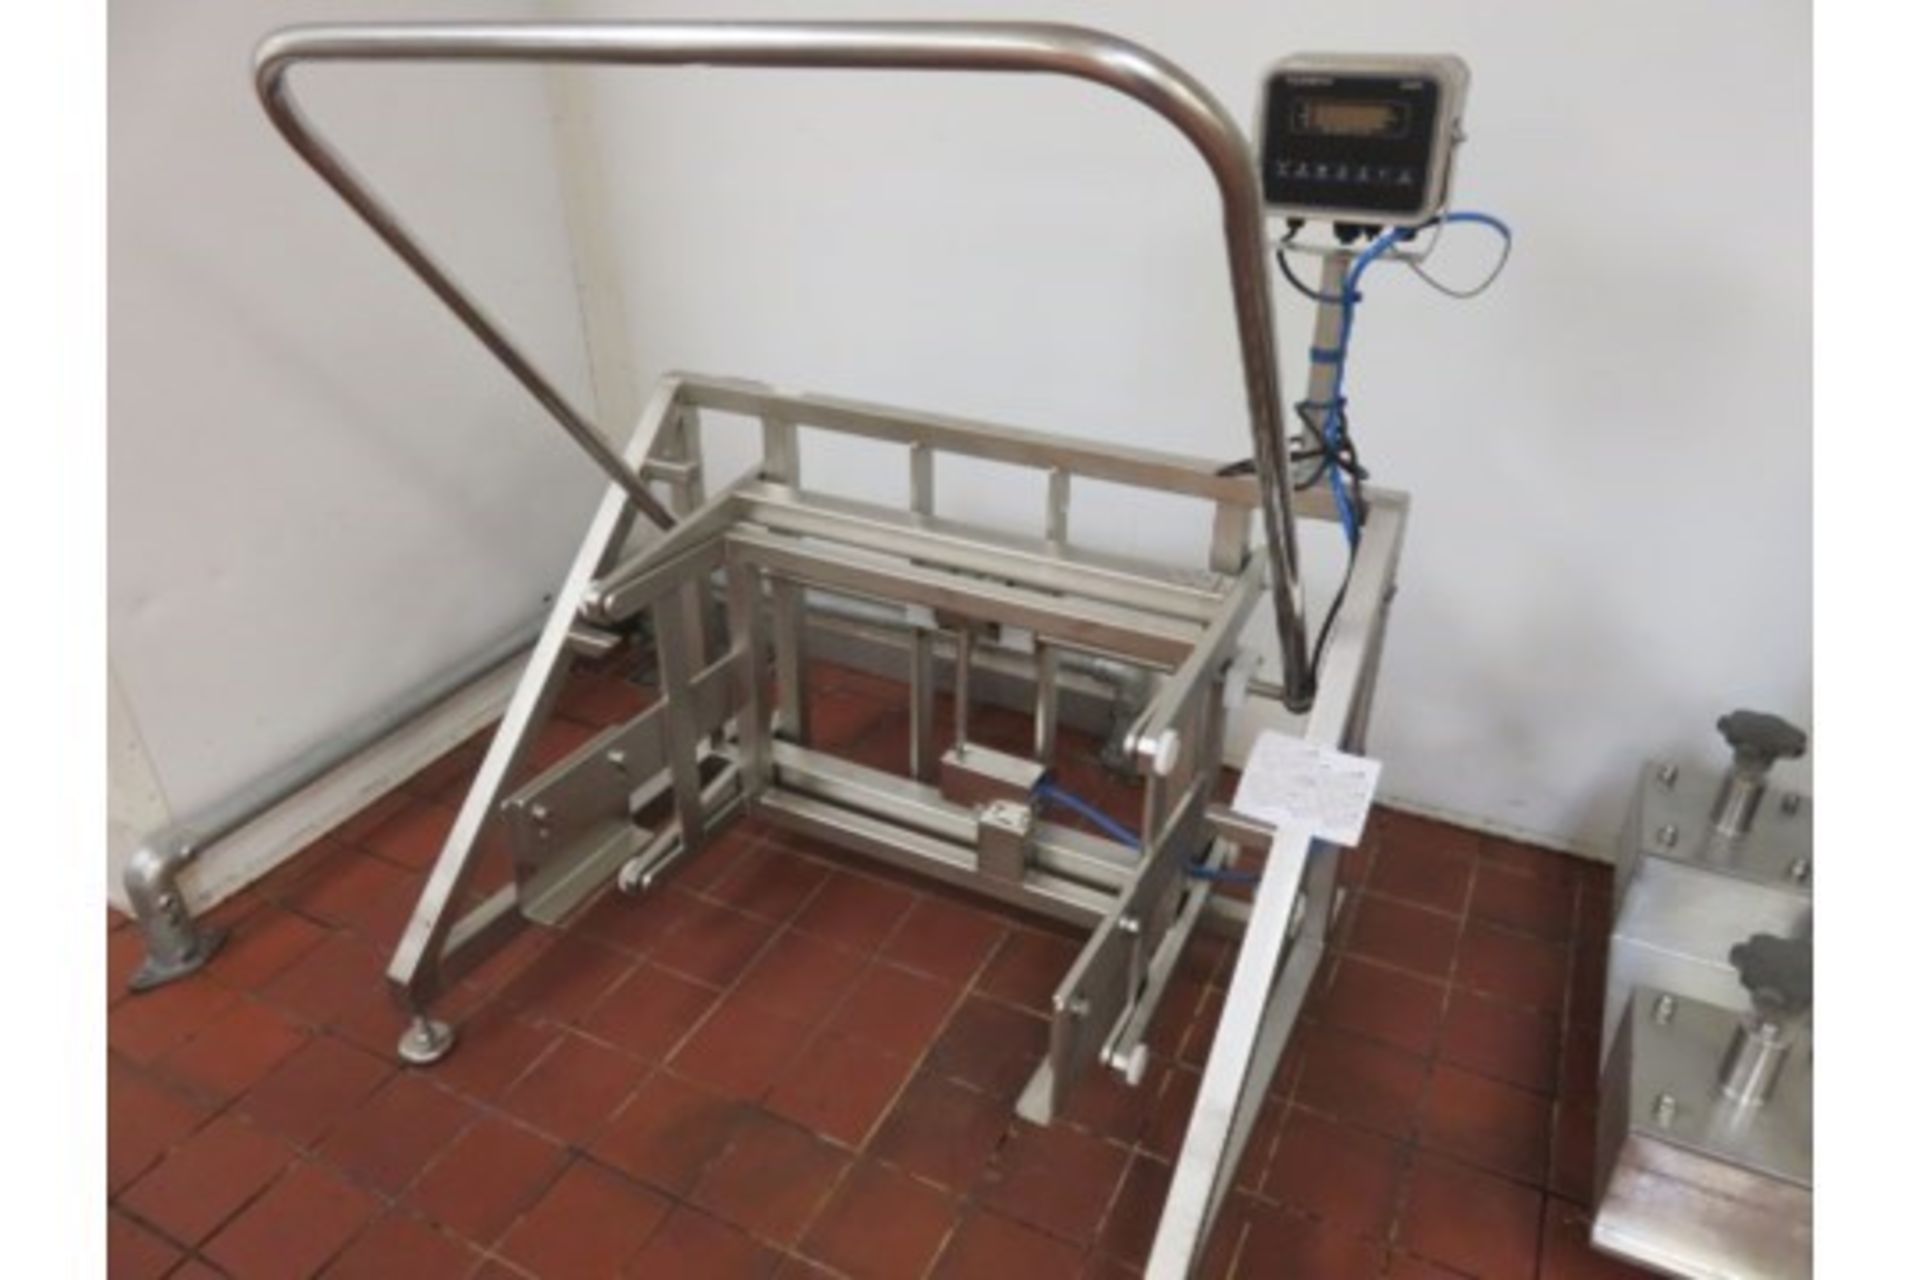 Syspal 200 litre tote bin weigher with Avery Weightronix model ZM201 controls. LO £40. - Image 2 of 3